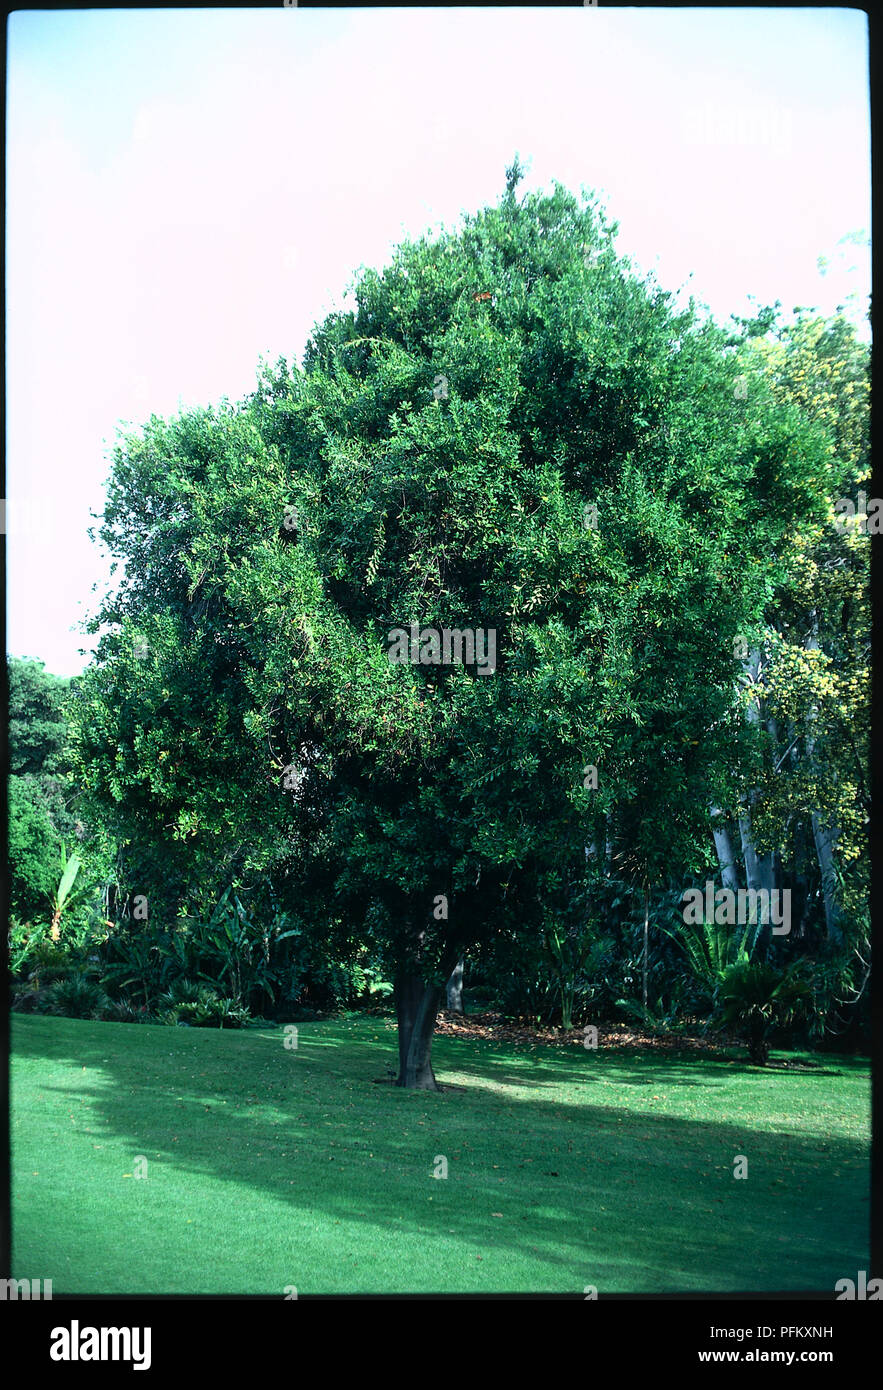 Macadamia integrifolia (Macadamia nut, Queensland nut). Evergreen, spreading tree with edible, brown nuts in autumn. Has whorls of leathery, semi-glossy leaves and panicles of small, creamy-yellow flowers in spring. Stock Photo